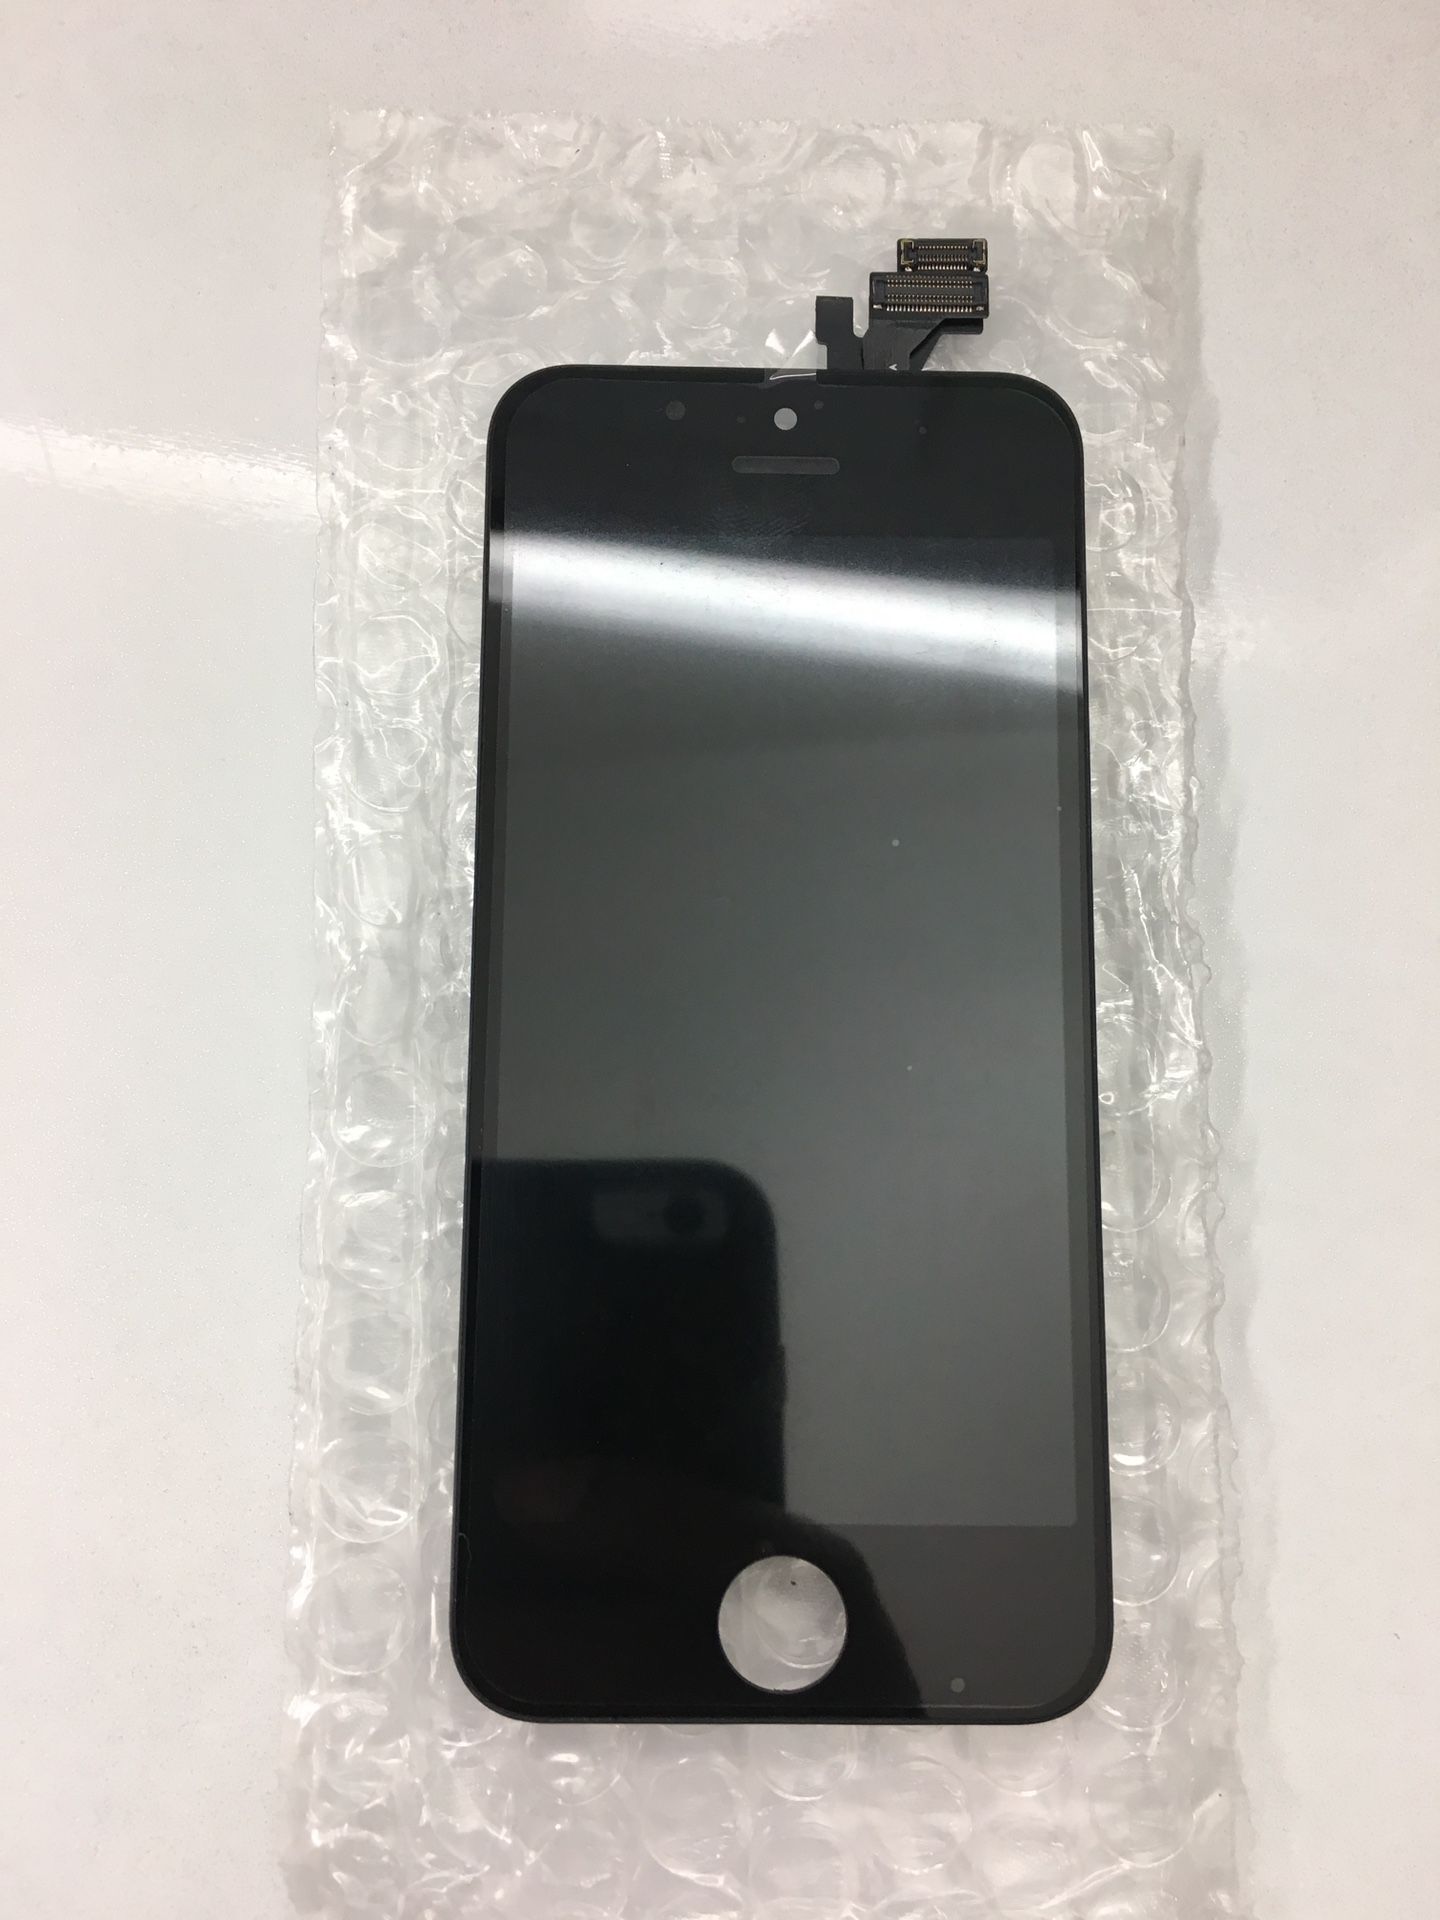 iPhone 5 LCD Digitizer Touch Screen Assembly Part - Black